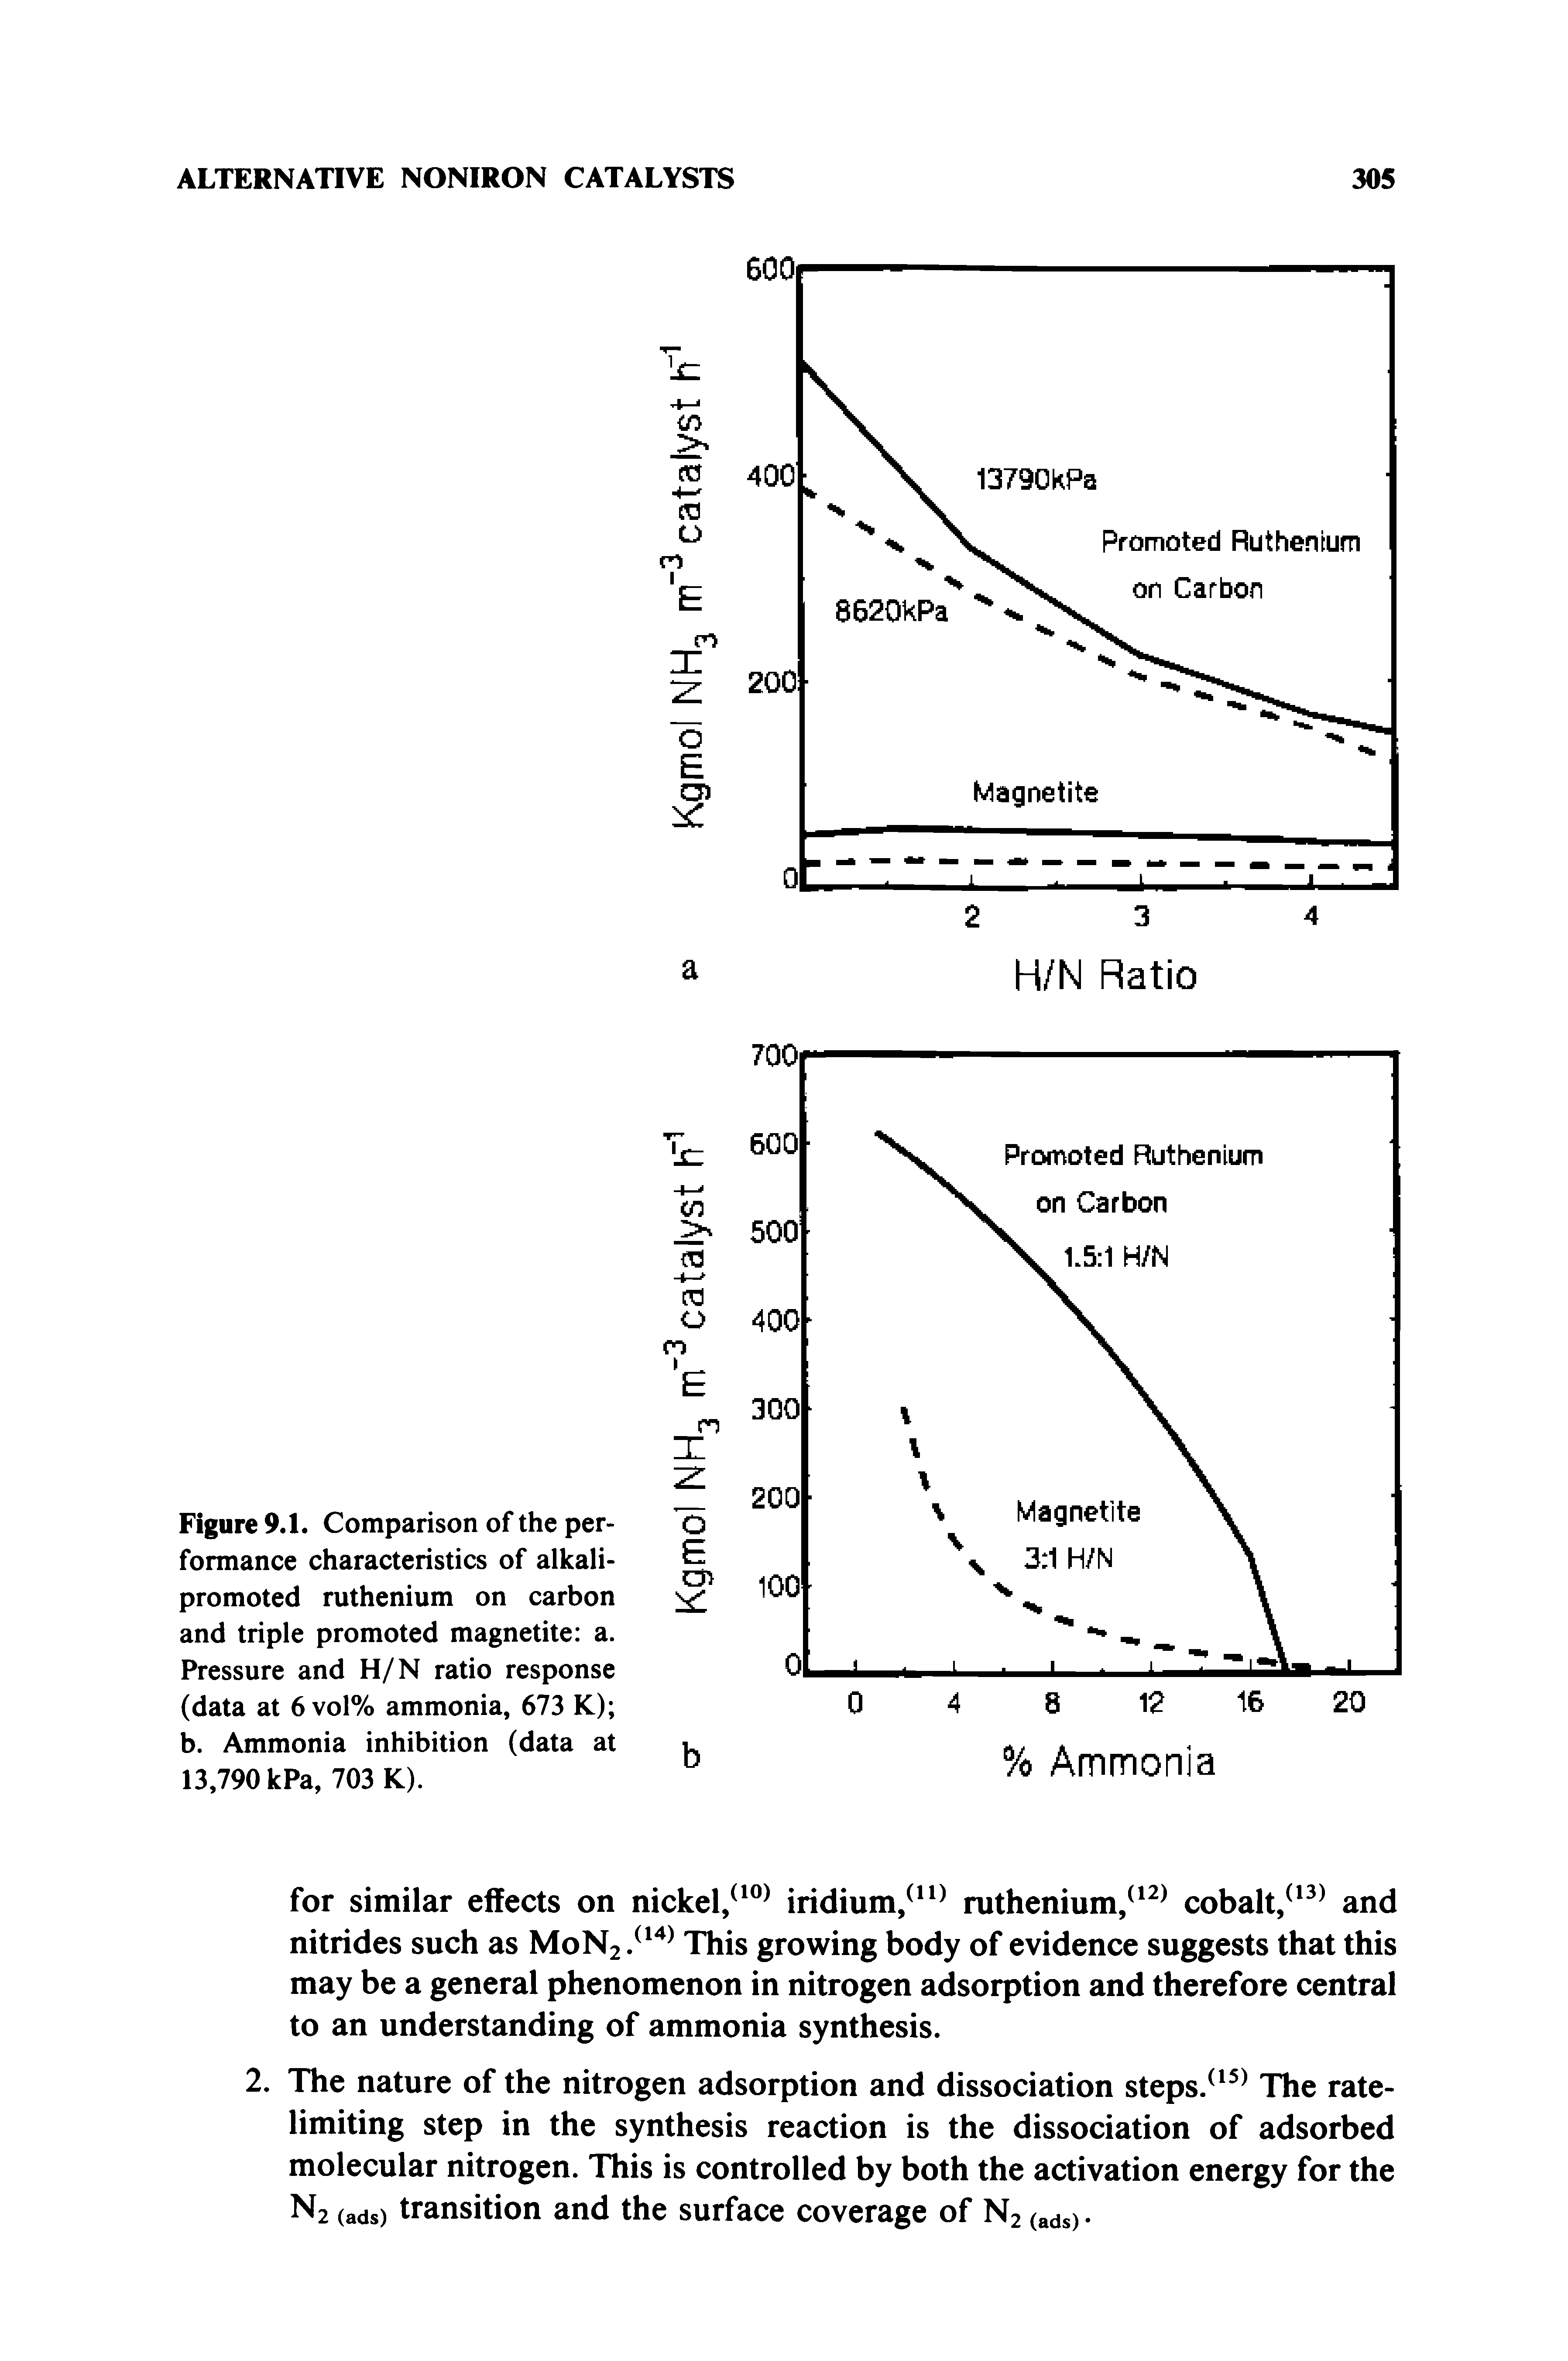 Figure 9.1. Comparison of the performance characteristics of alkali-promoted ruthenium on carbon and triple promoted magnetite a. Pressure and H/N ratio response (data at 6vol% ammonia, 673 K) b. Ammonia inhibition (data at 13,790 kPa, 703 K).